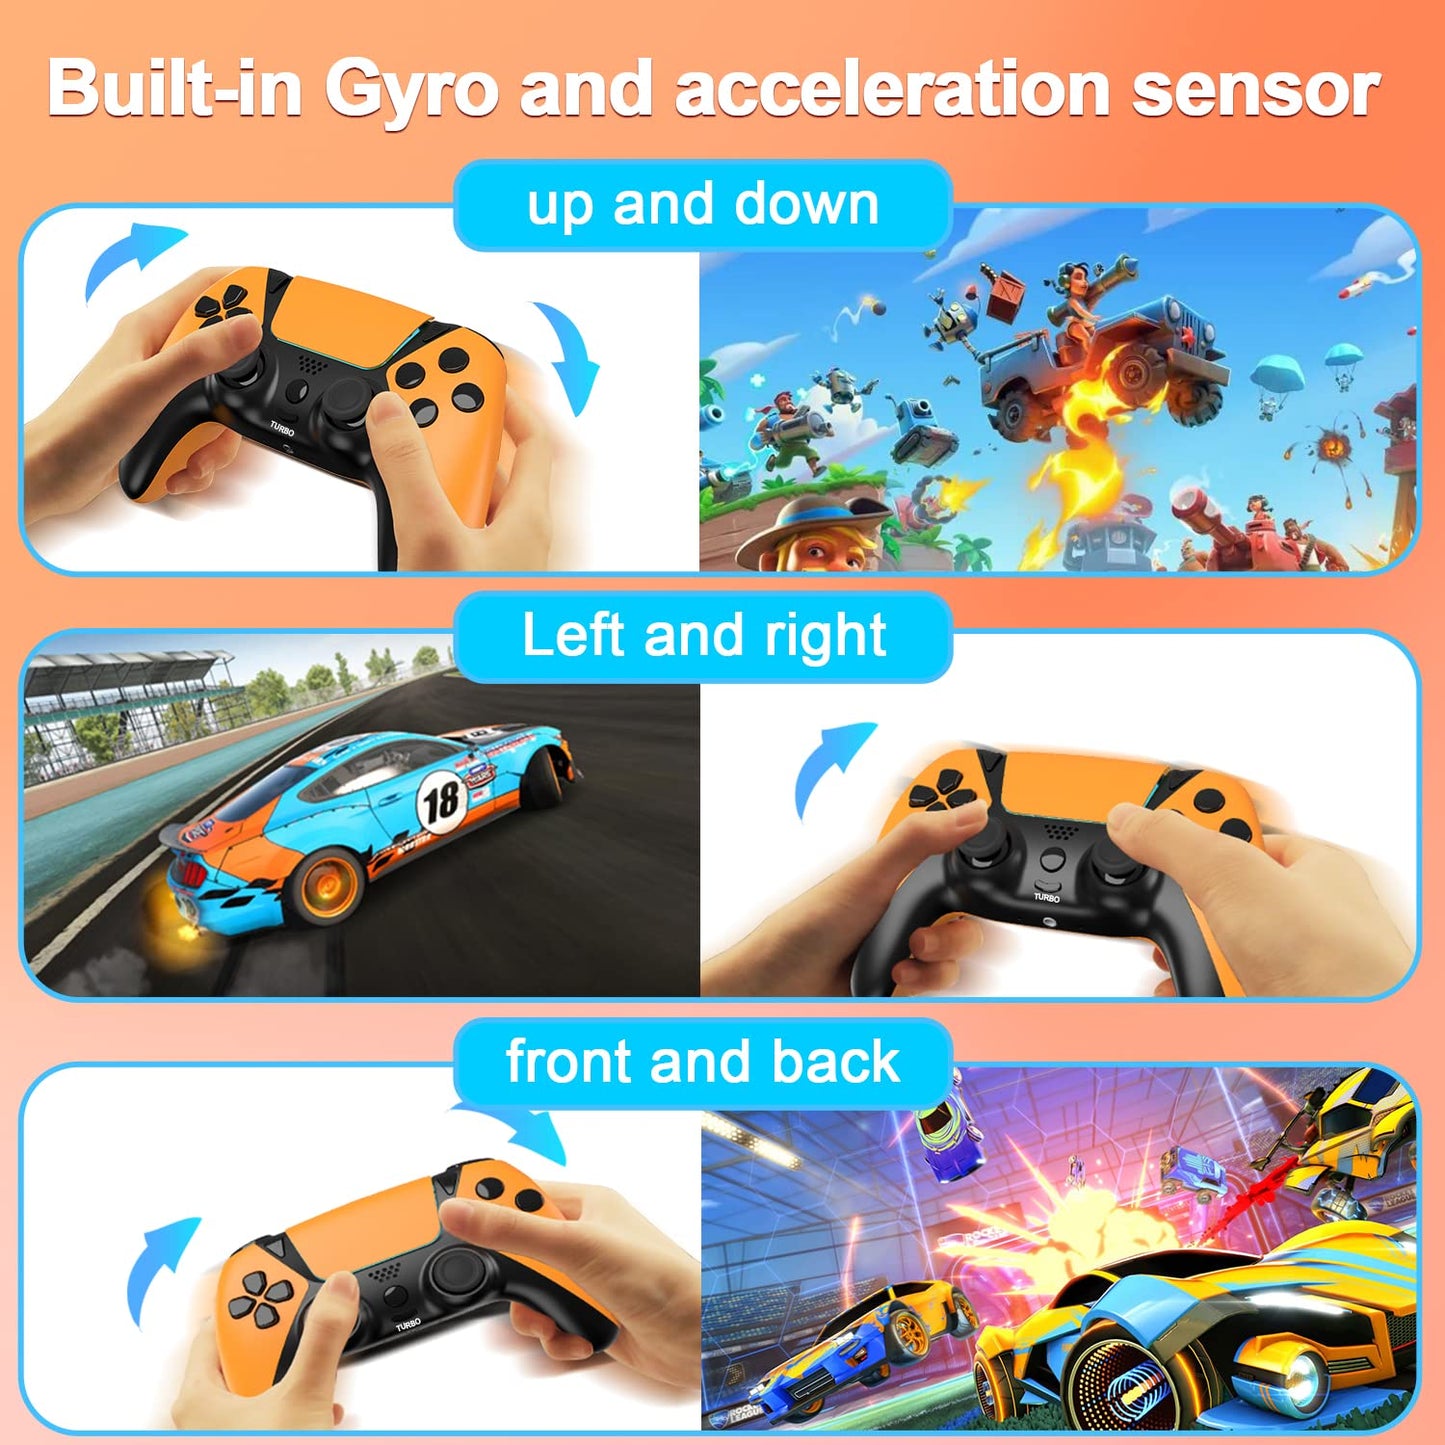 UGAME Ymir Controller for PS4 Controller, Elite Control Remote Compatible with Playstation 4 Controller, Steam Gamepad for Scuf PS4 Controllers with 3D Joystick/Mapping/Turbo/1200 mAh Battery Orange